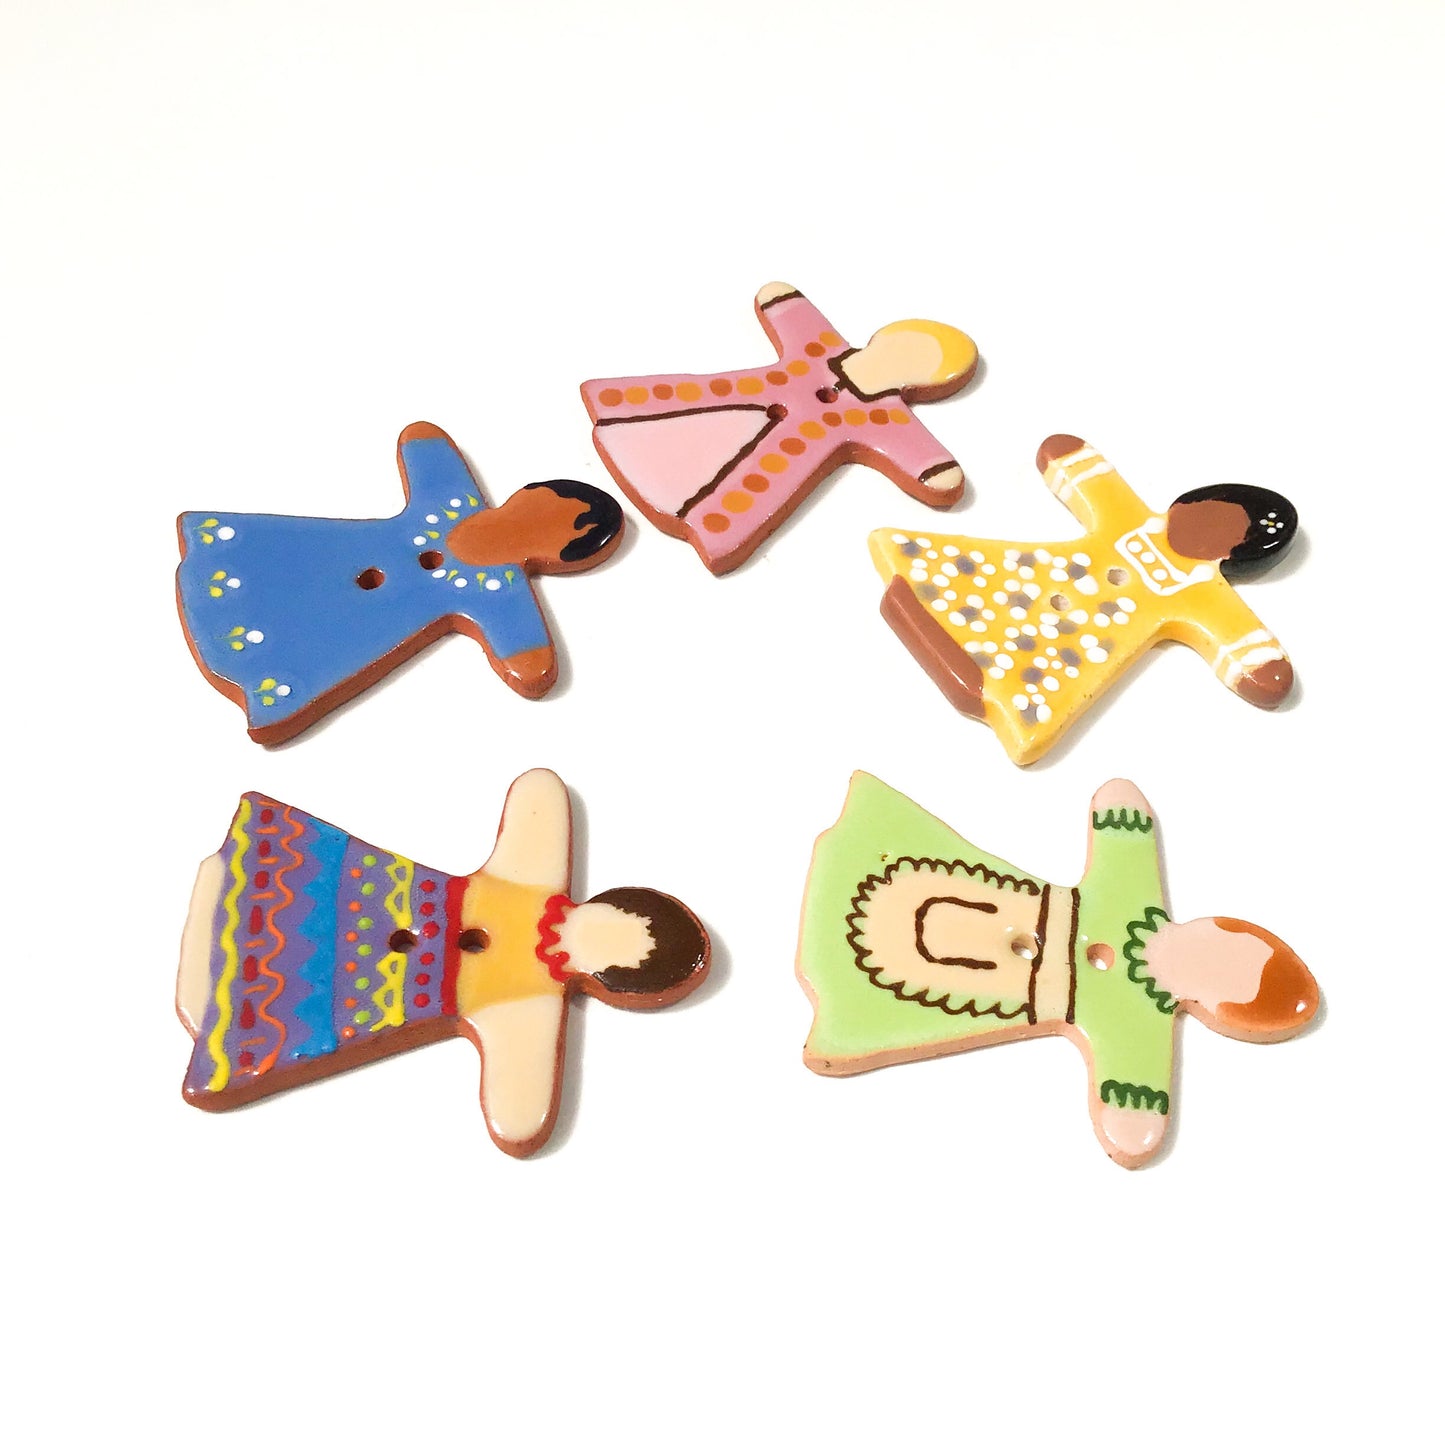 Wee Folk 'Mama' Buttons - Waldorf Inspired Ceramic Buttons - 1 3/8" x 1 5/8"